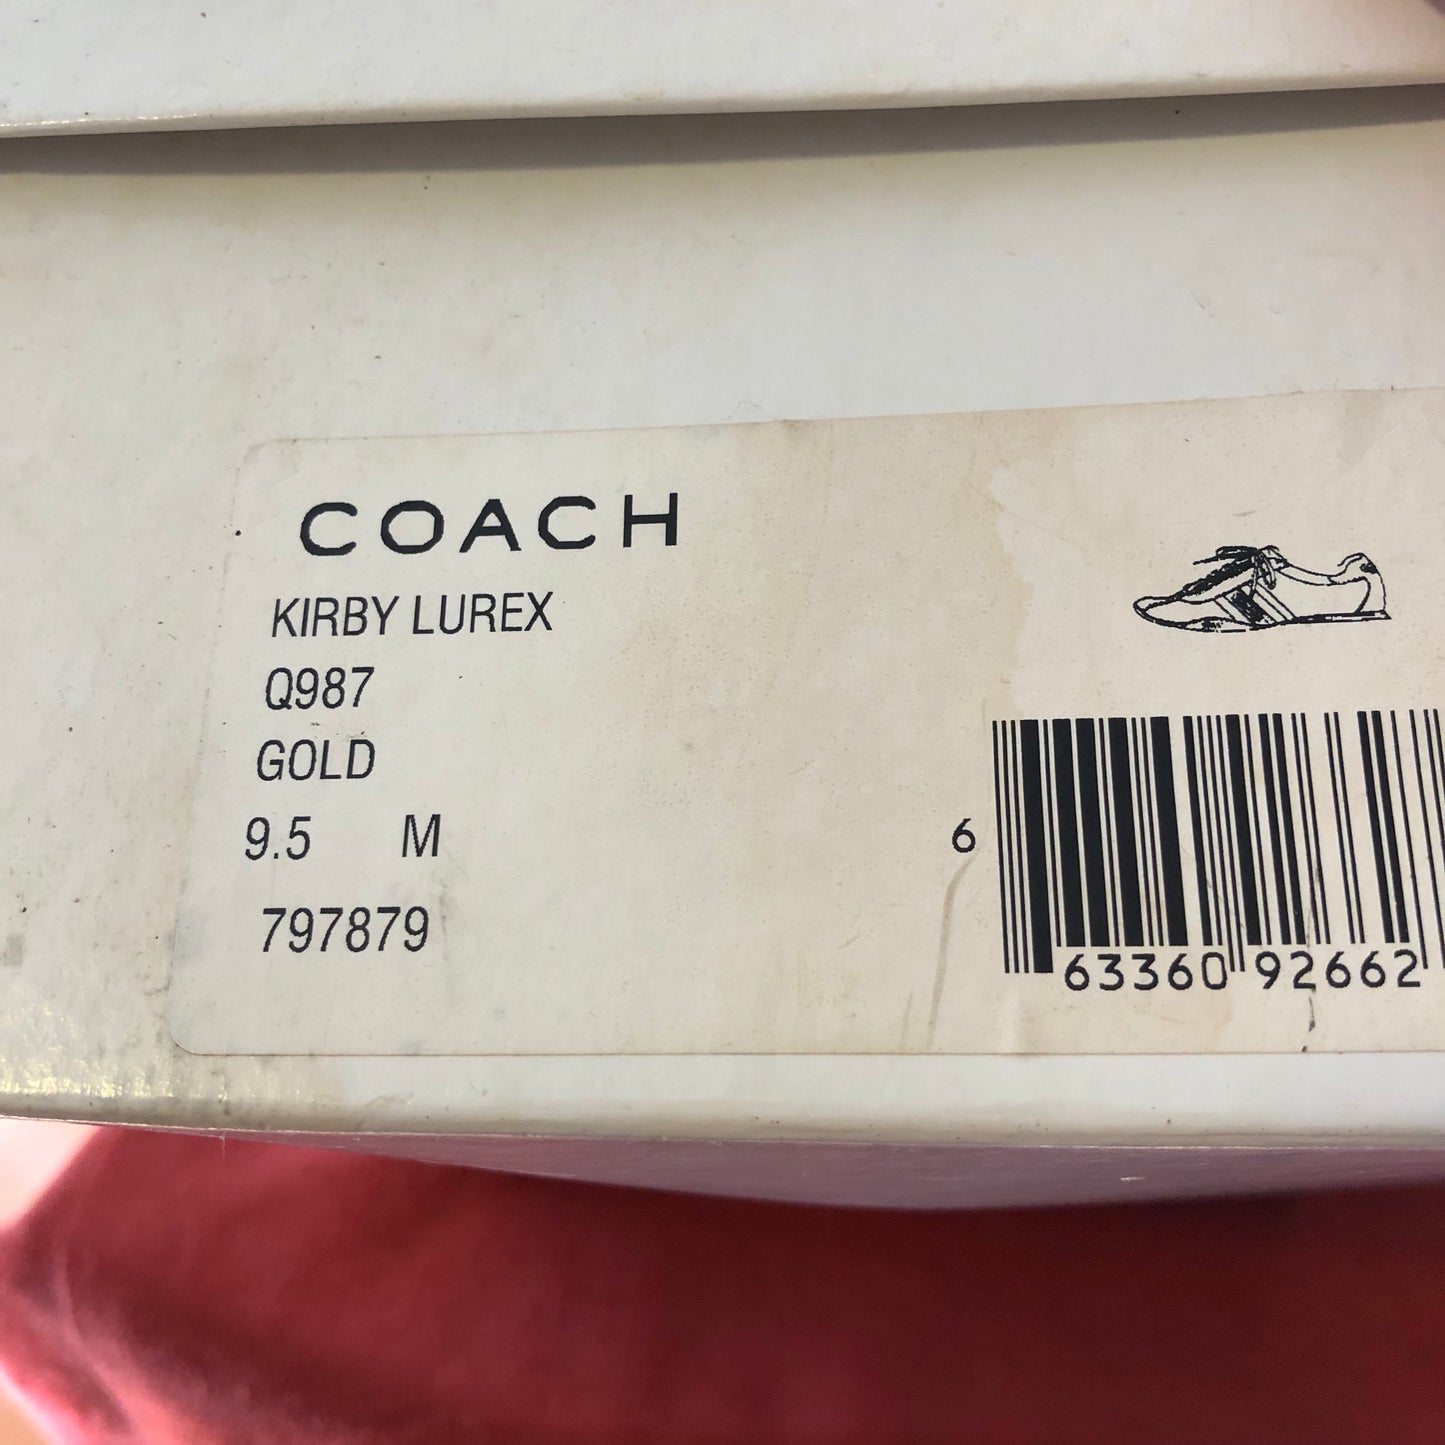 Coach Sneakers-Kirby Lurex Style-Size 9.5M